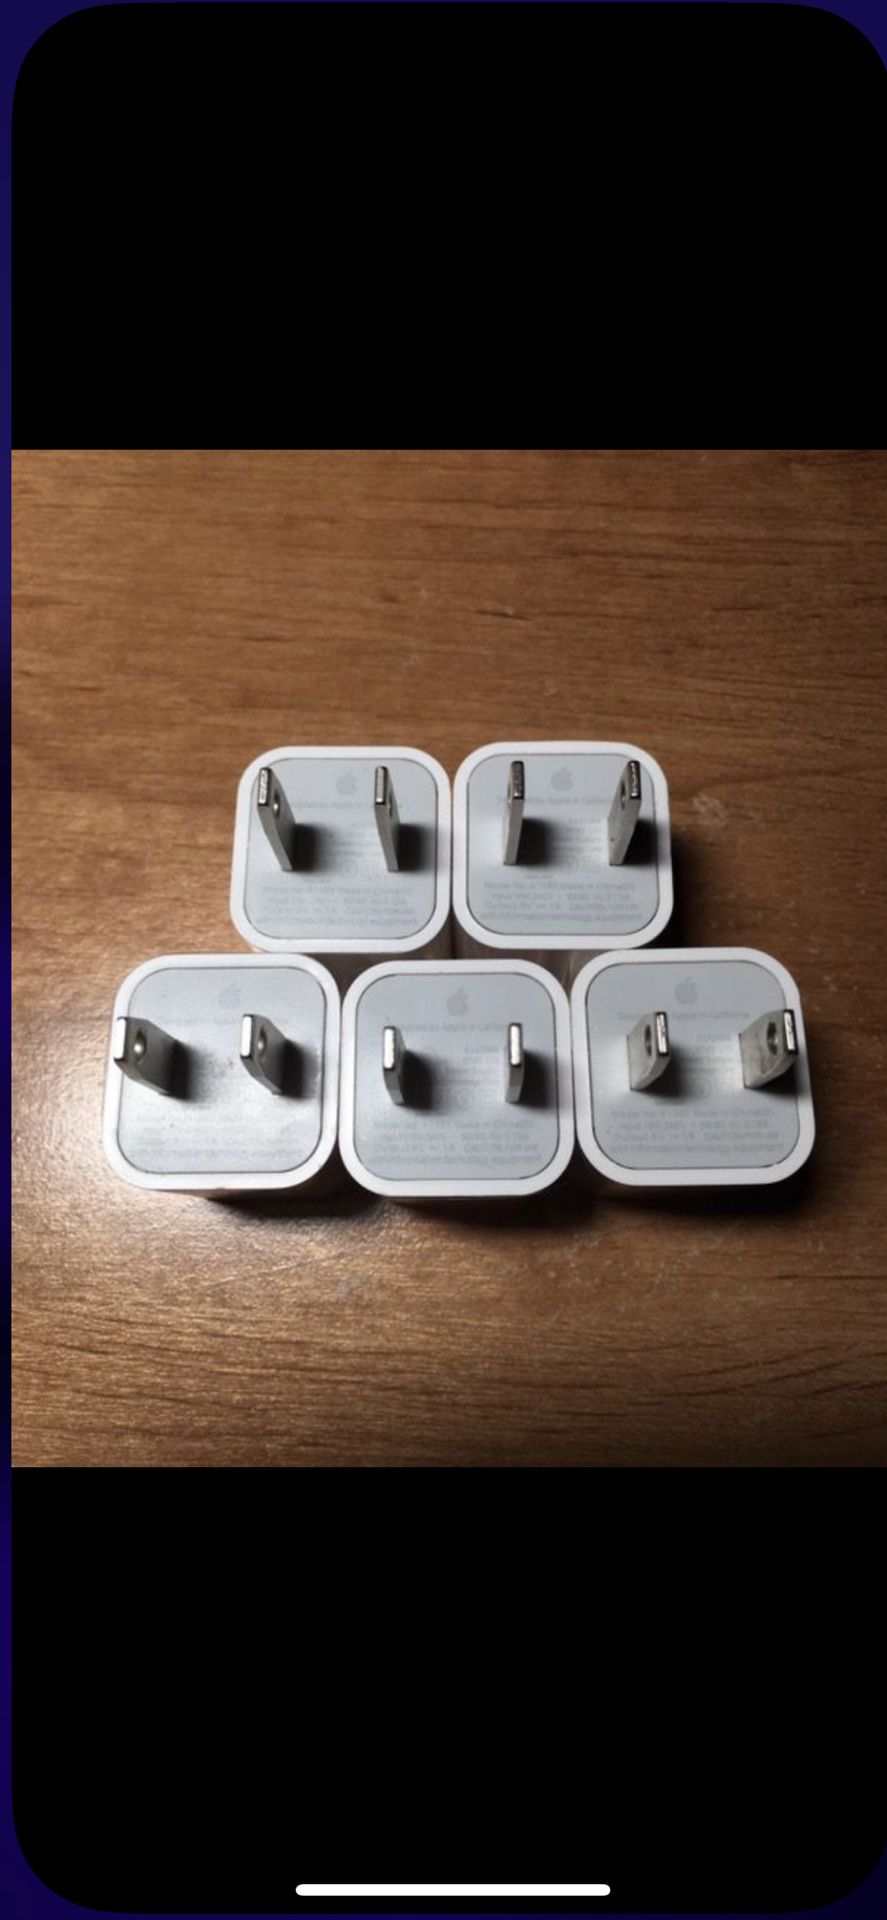 5x OEM Wall Charger For Apple iPhone 